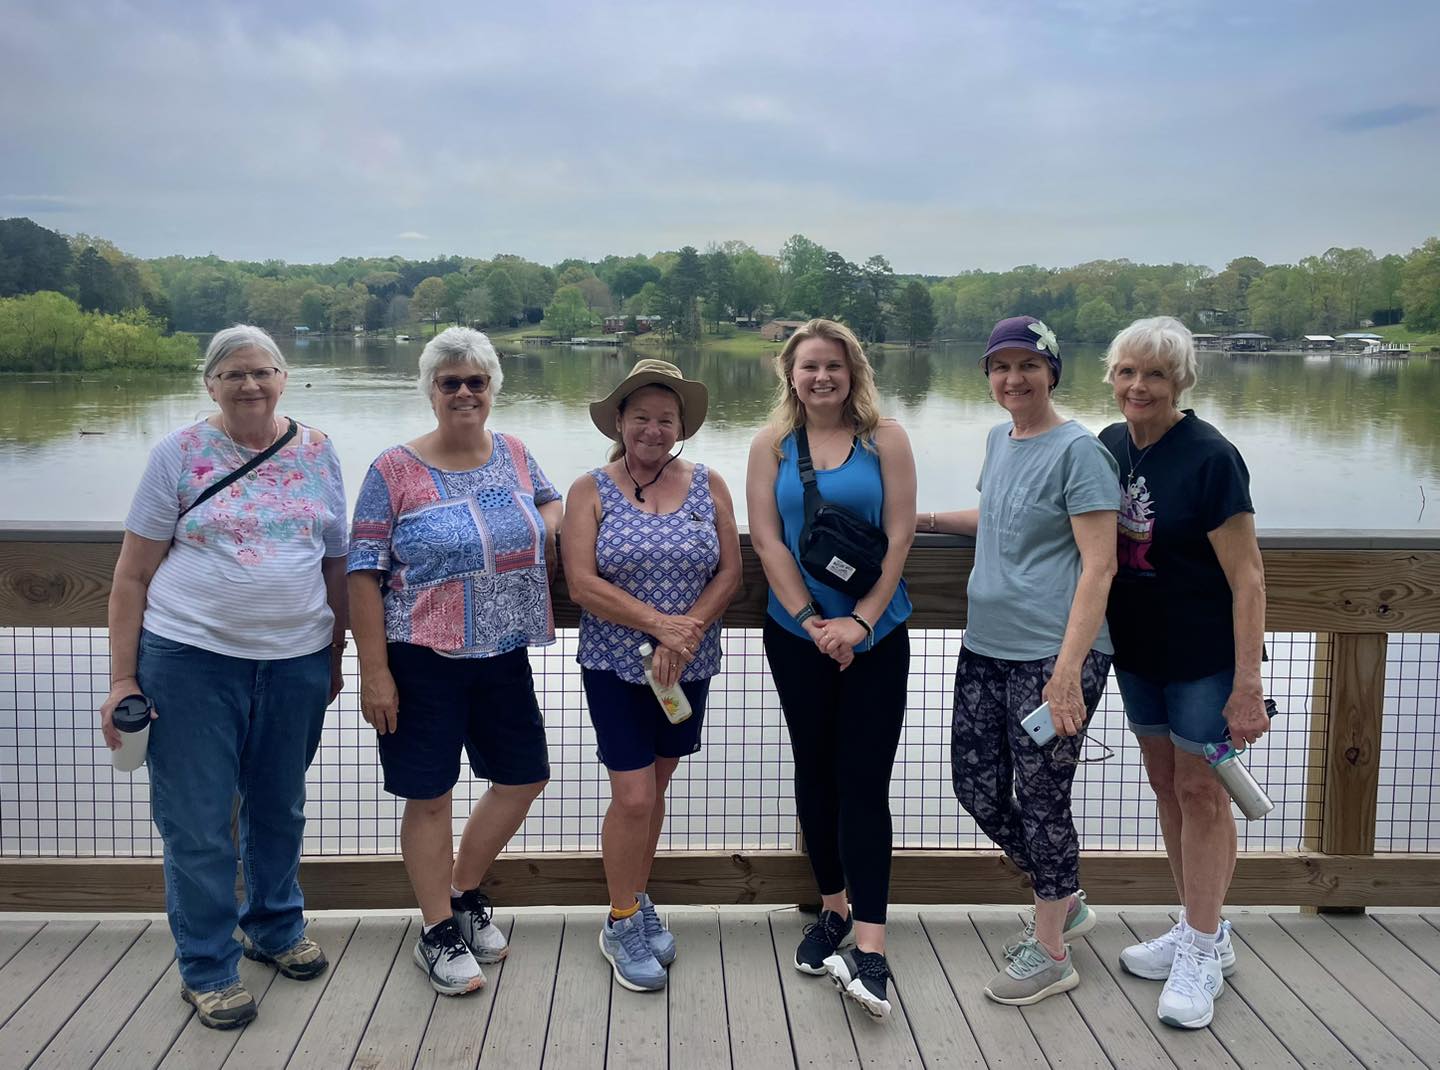 Six smiling people wearing walking shows and standing on a deck in front of a lake